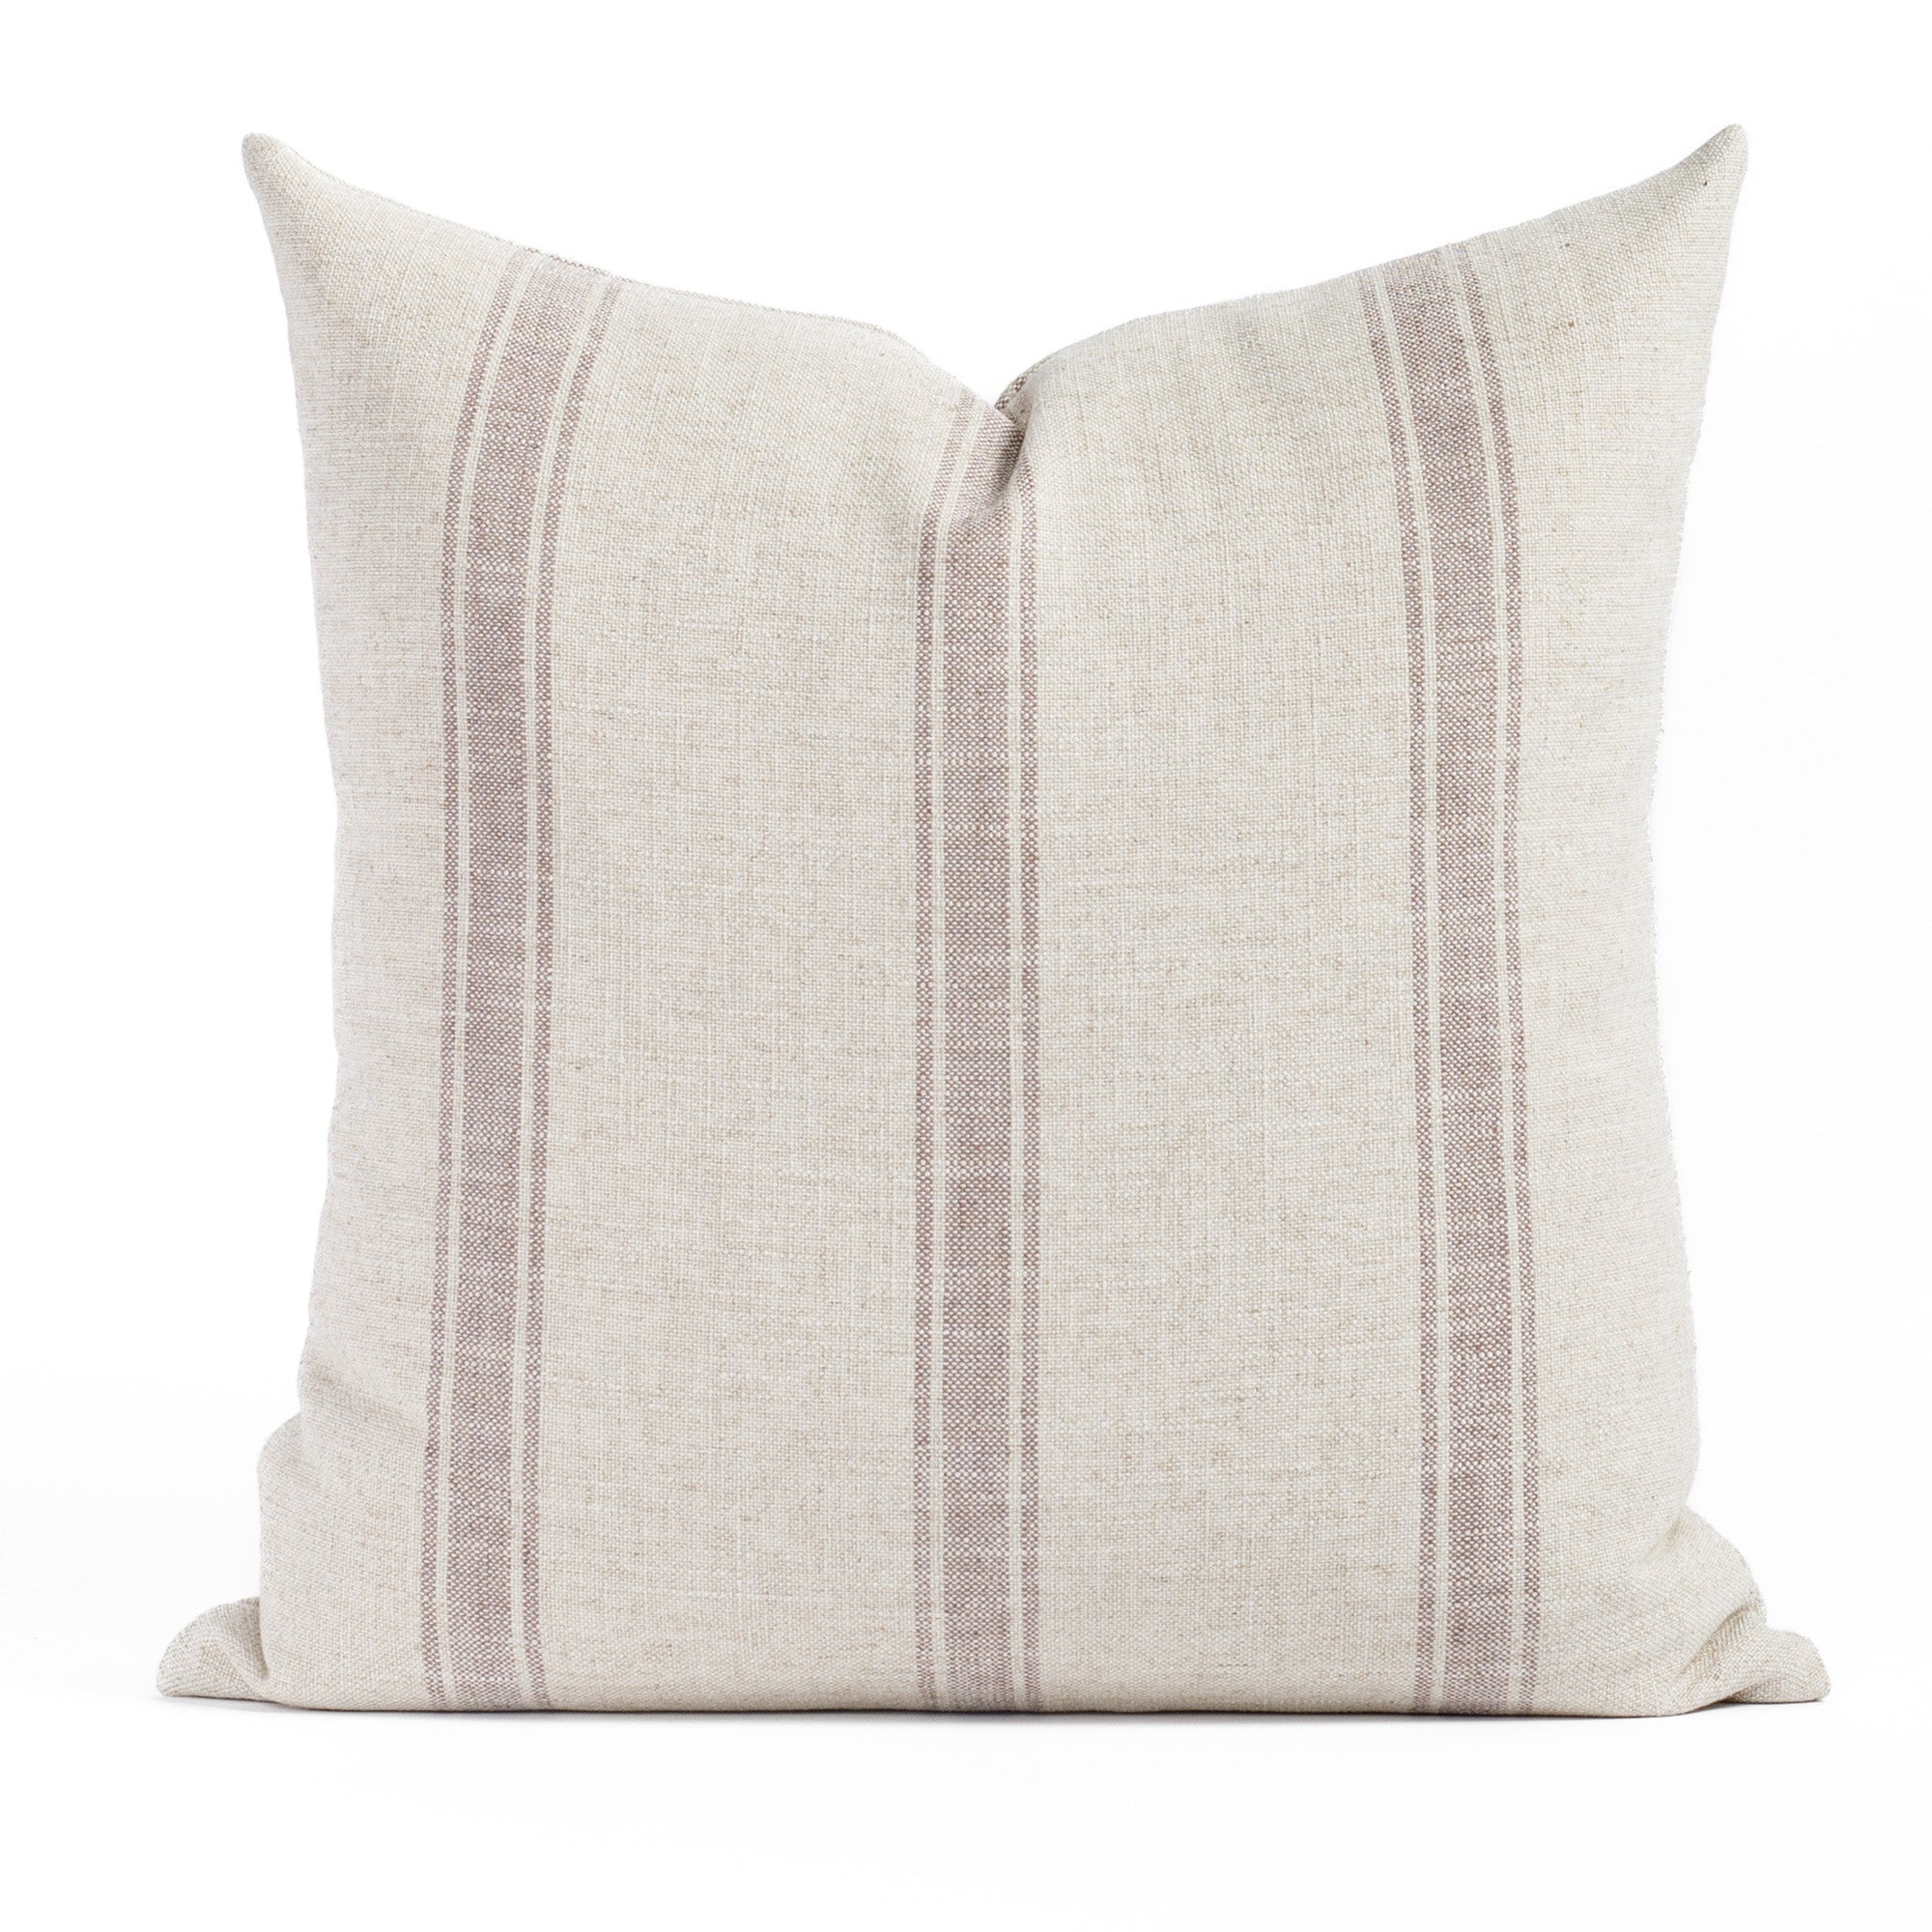 Theo 22x22 Pillow Mauve, a soft purple and oatmeal striped throw pillow from Tonic Living